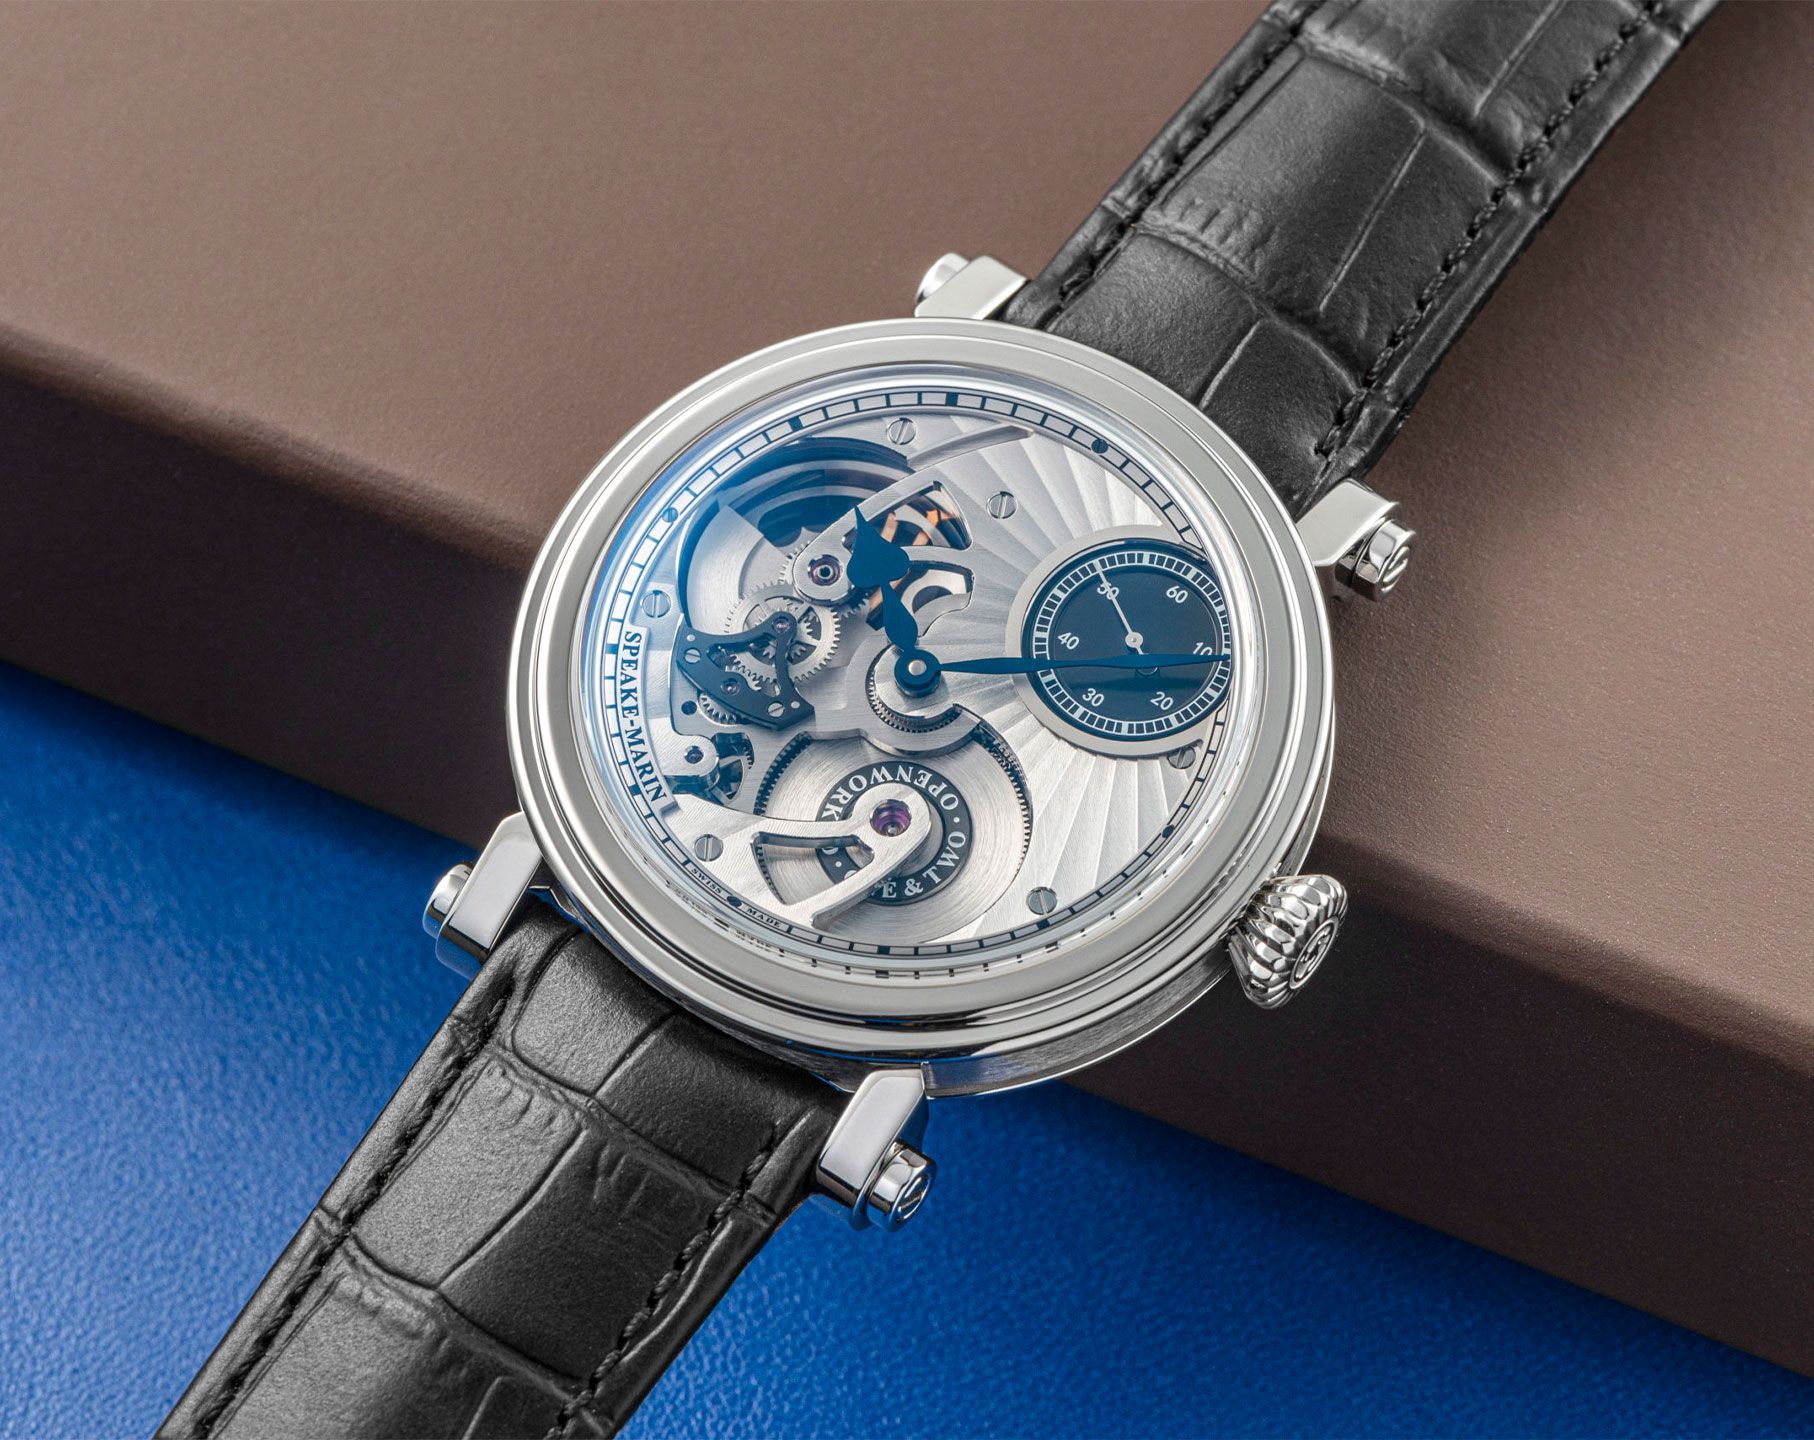 Speake-Marin One & Two Openworked Skeleton Dial 42 mm Automatic Watch For Men - 5